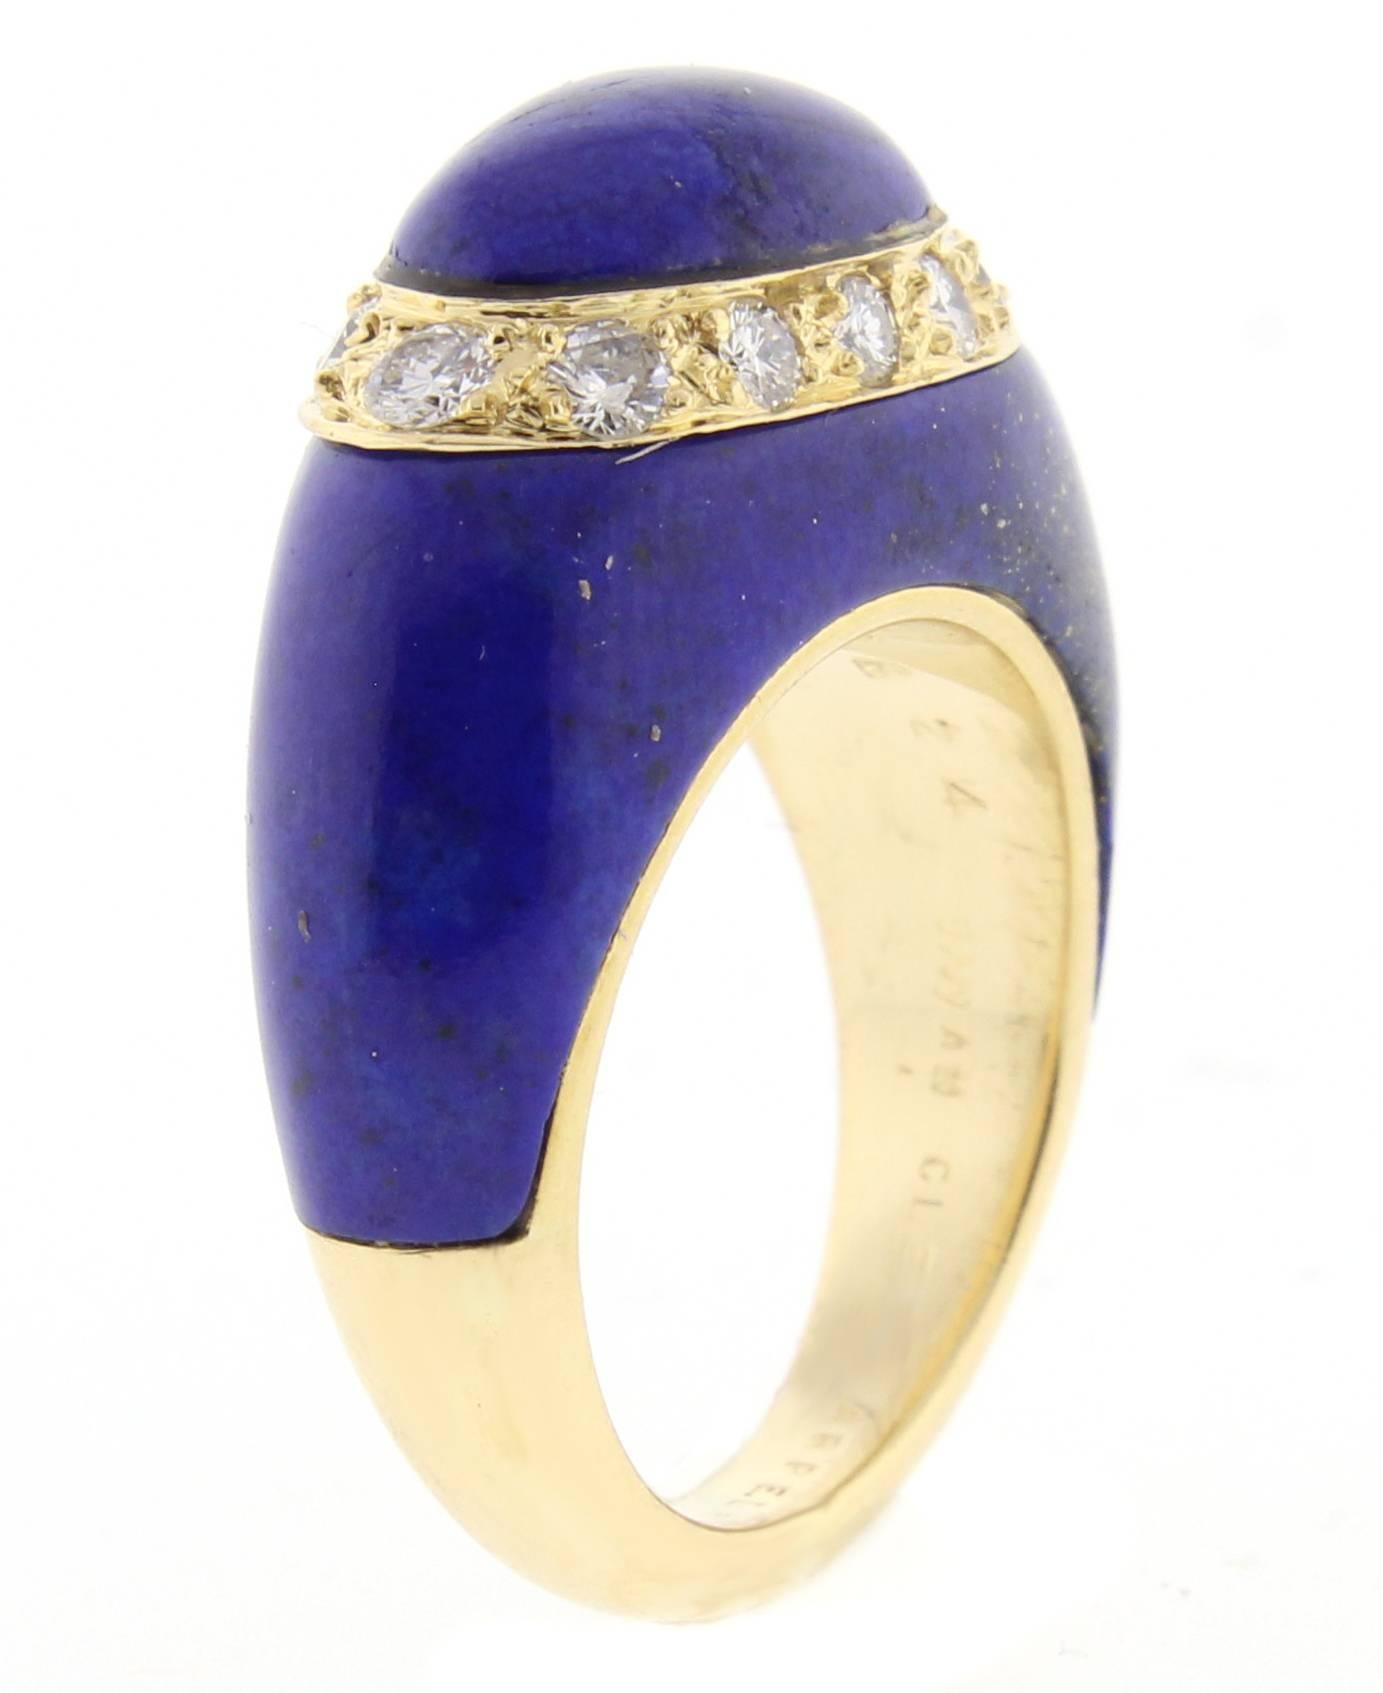  Classic 1960s 18 karat gold dome ring set with lapis and diamonds. The lapis is a deep celestial blue with golden flex. The 12 brilliant diamonds weigh approximately .30 carats. Made in France, signed Van Cleef & Arpels number 5V63824. 9.2mm